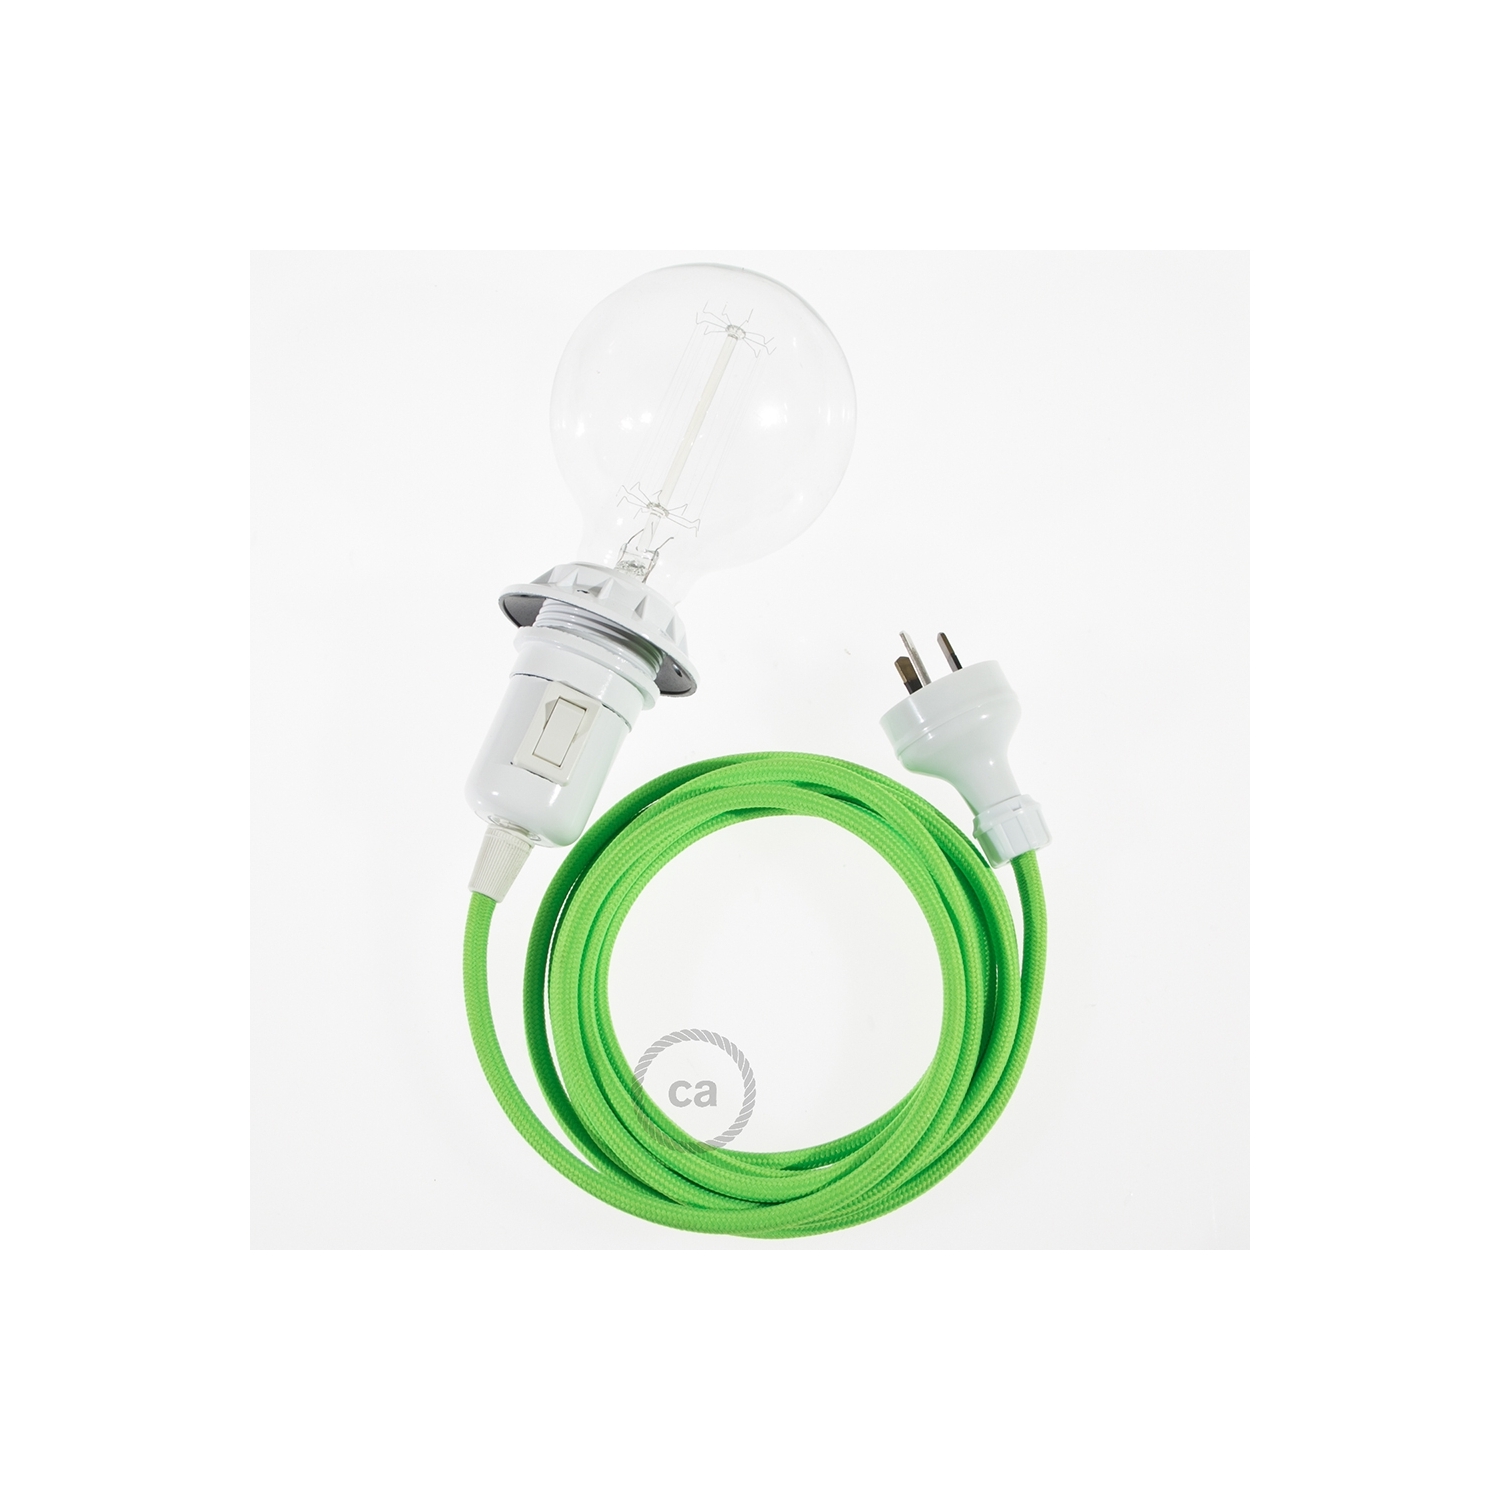 Create your RF06 Green Fluo Snake for lampshade and bring the light wherever you want.